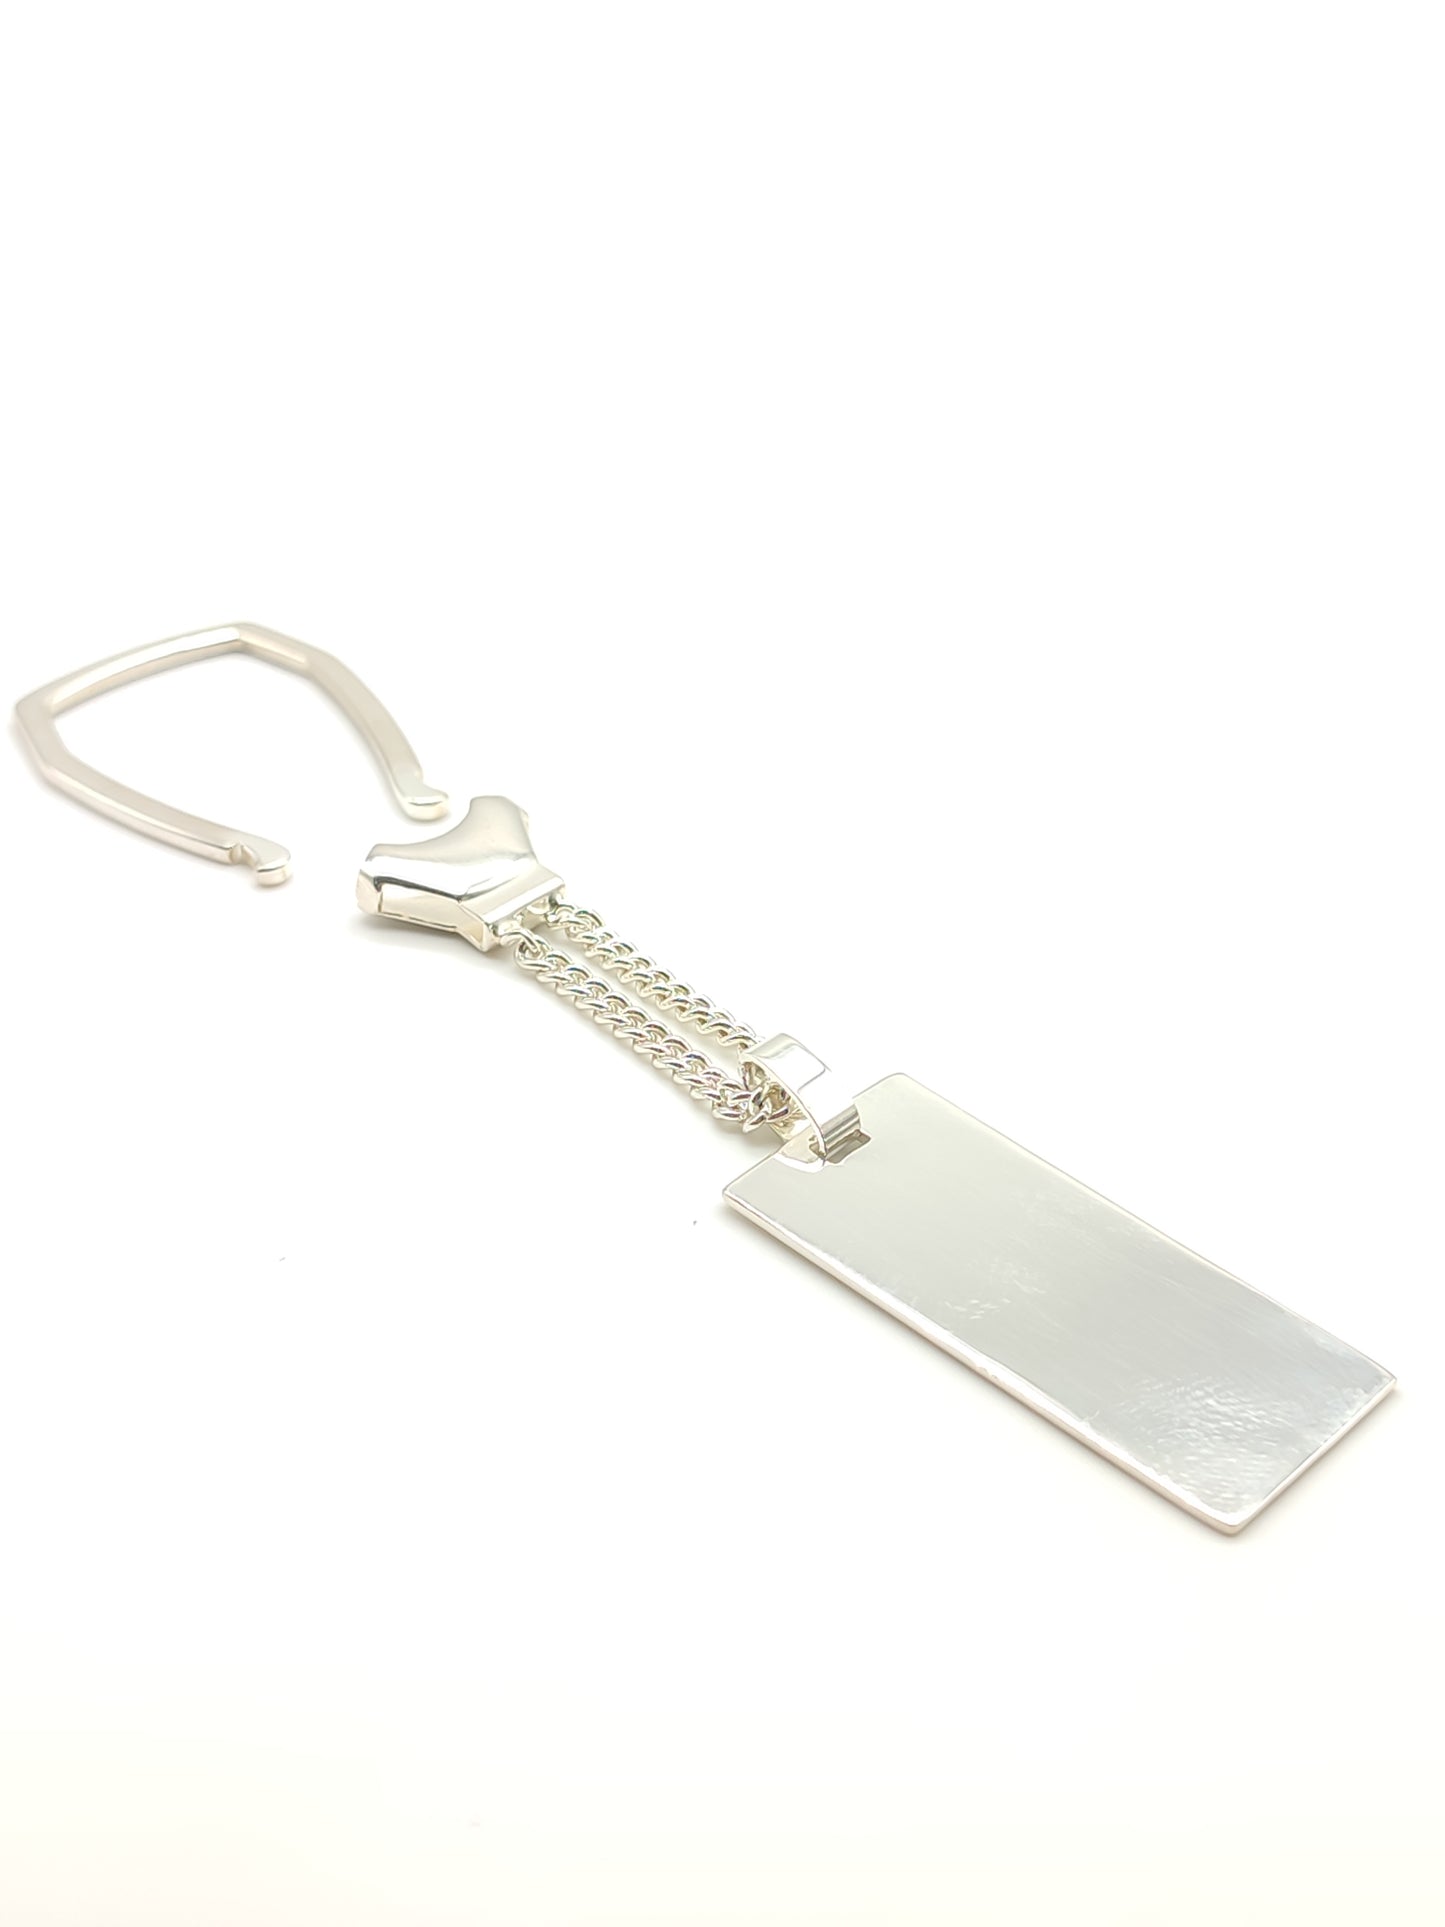 Silver key ring with plate